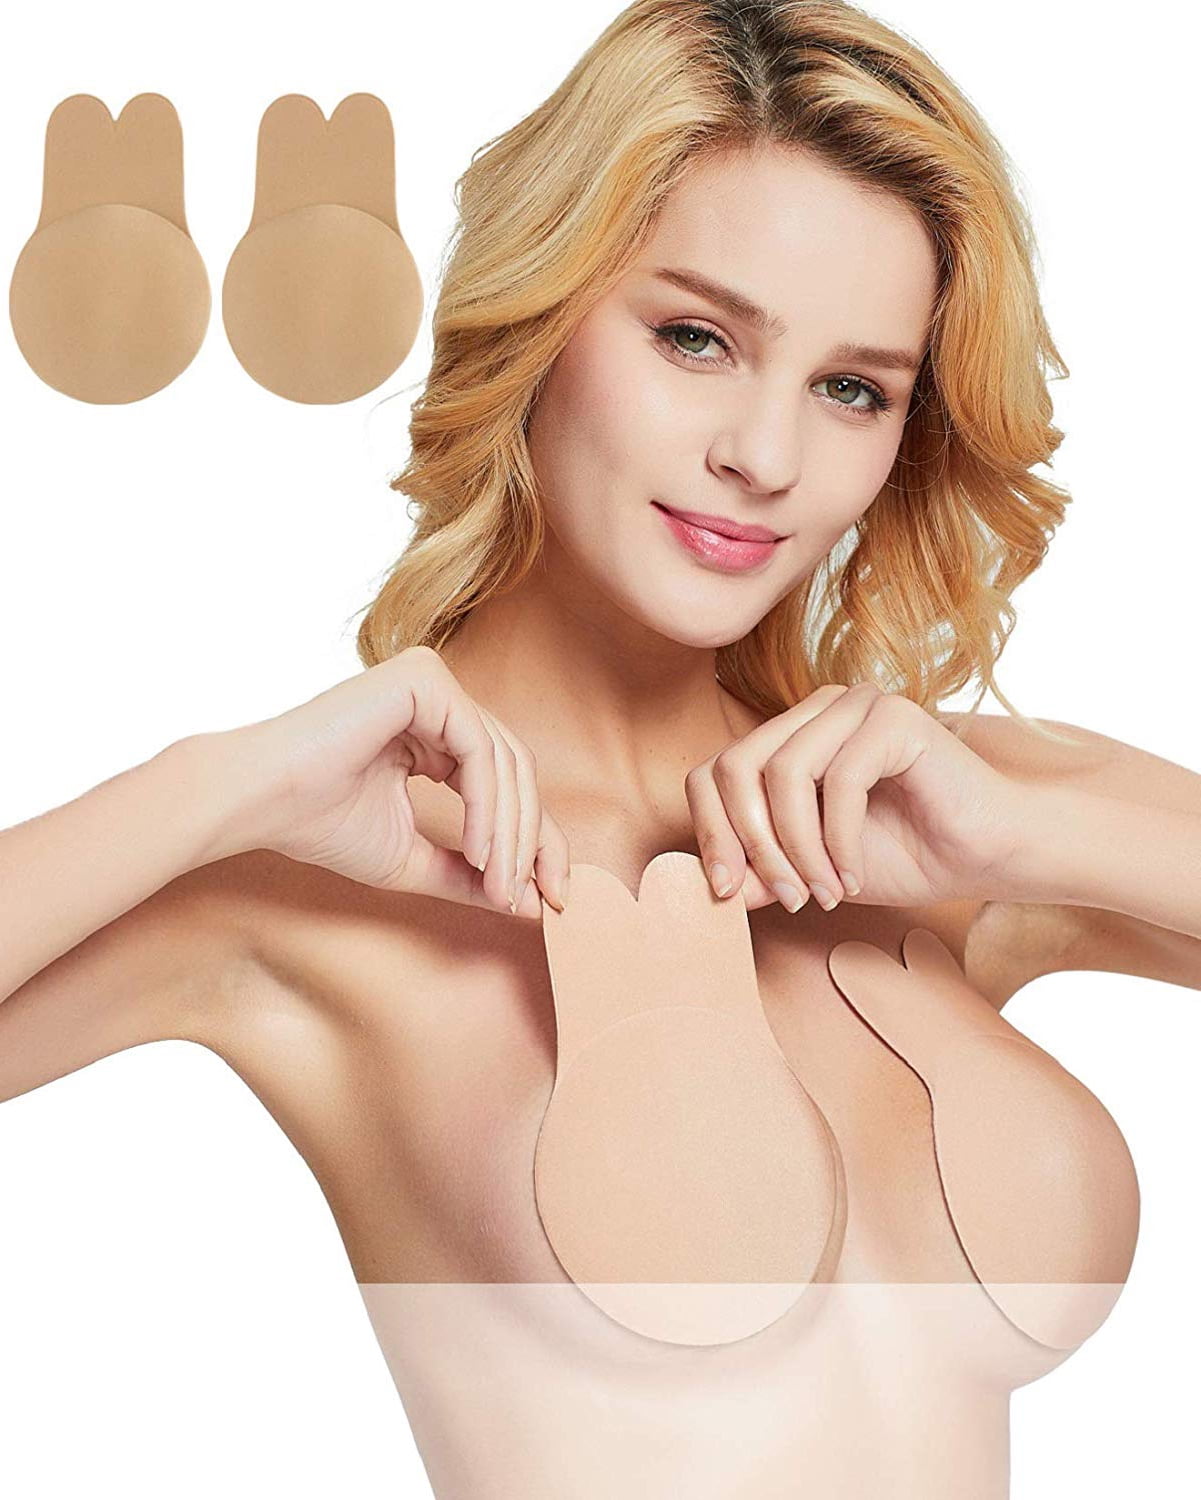 Sticky Bra Breast Lift Tape Breast Pasties 2 Pairs Adhesive Bra Invisible Lift Up Tape Rabbit Ear Push Up Bra for Women